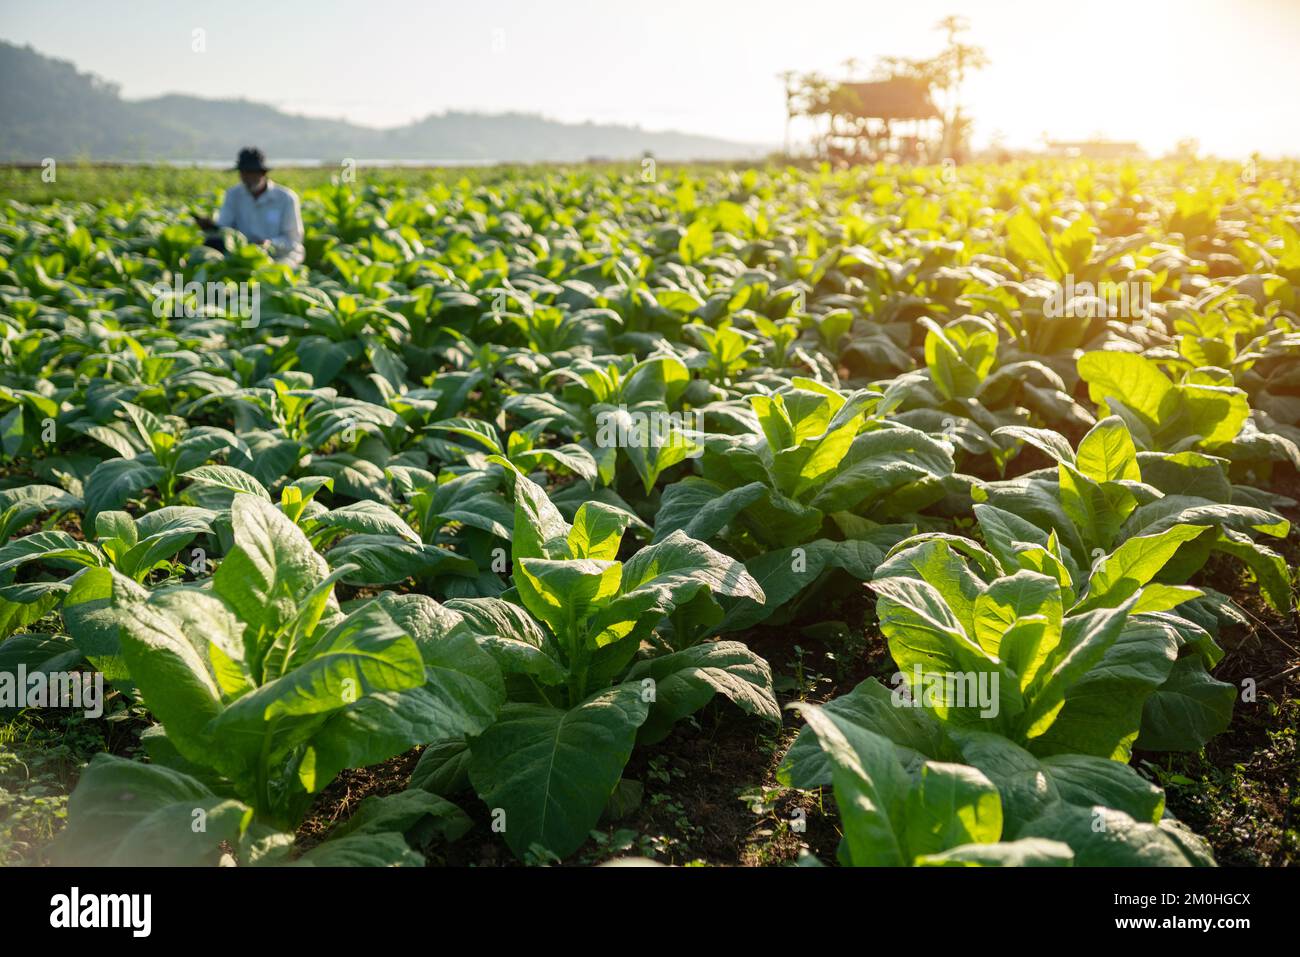 garden in the tobacco field Mekong riverside in Nong Khai Province Thailand. Stock Photo